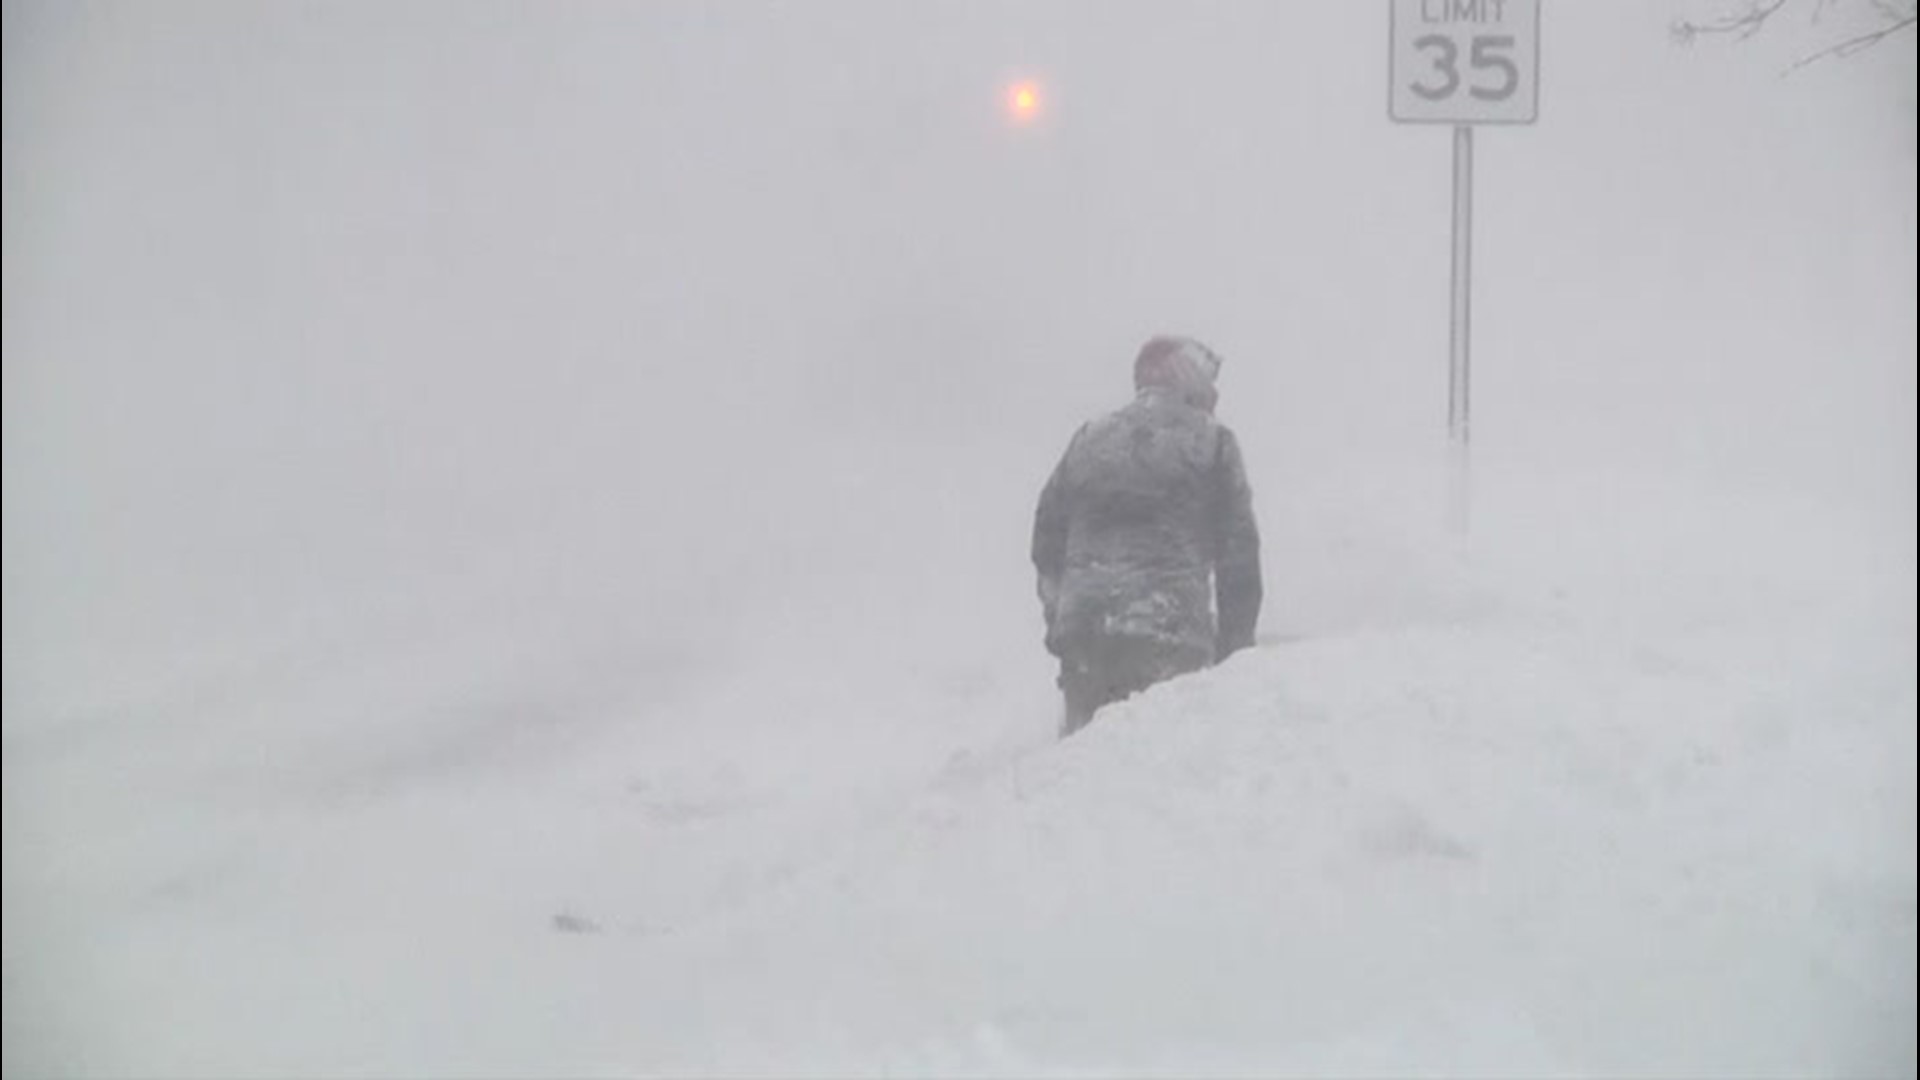 High winds and heavy snowfall have pounded the Great Lakes area of New York, creating whiteout conditions. Our Dexter Henry was in Adams Center, New York, watching the lake-effect event.